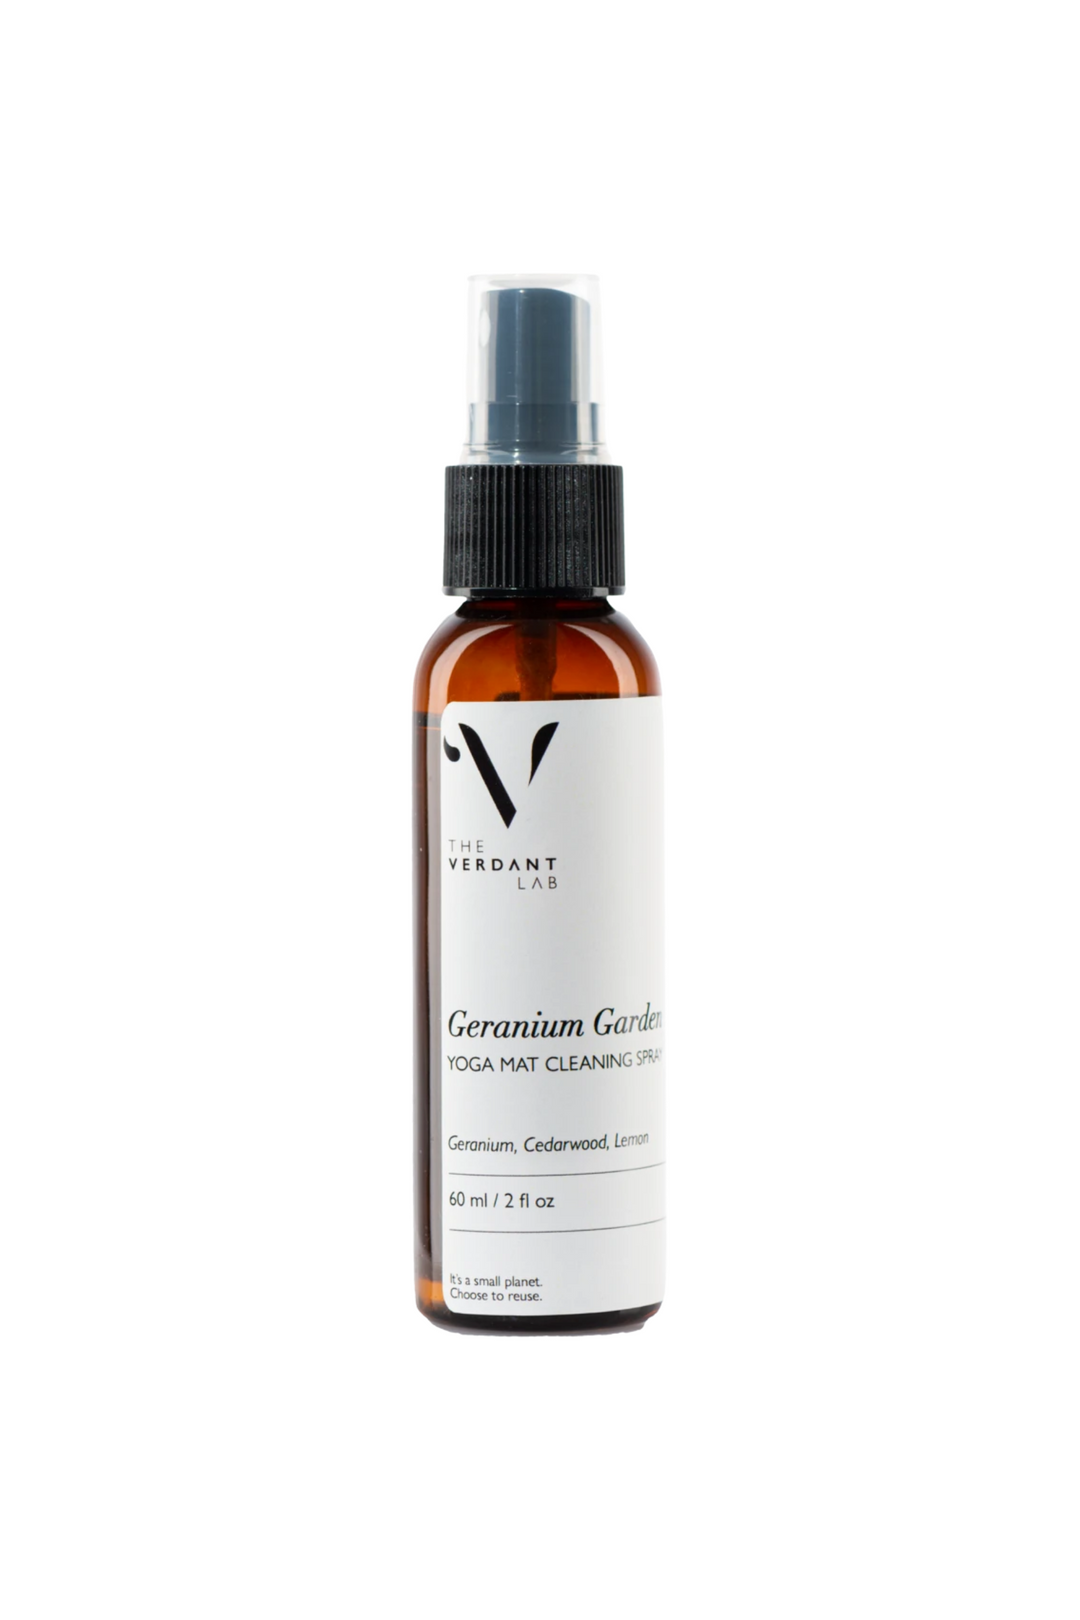 The Verdant Lab Yoga Mat Cleaning Spray in Geranium Garden, available on ZERRIN with free Singapore shipping above $50